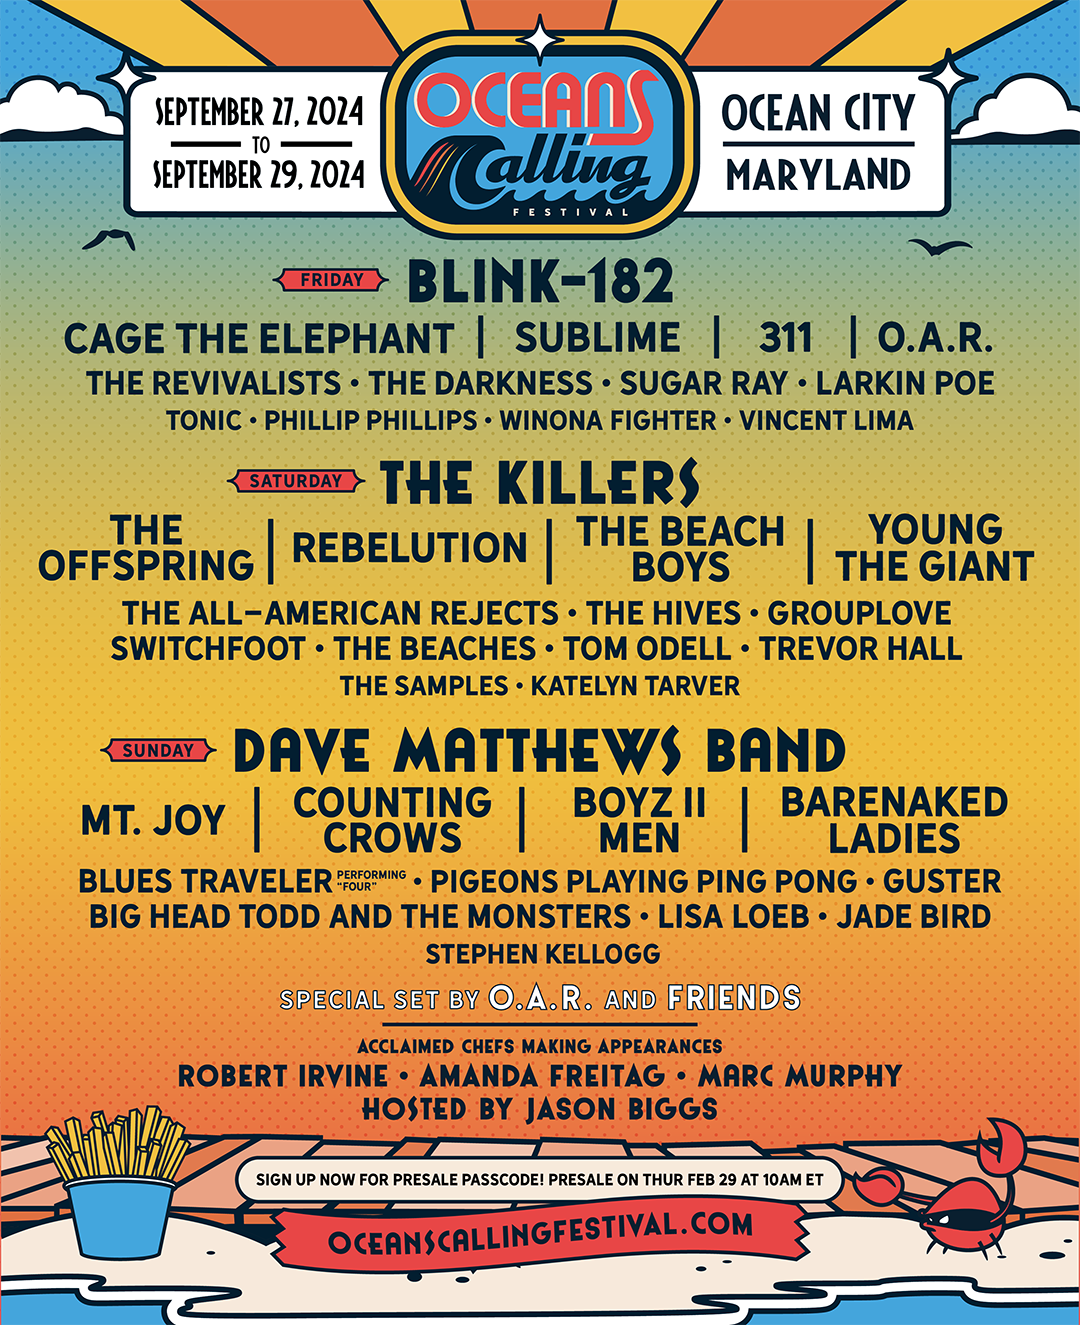 Oceans Calling 2024 Lineup: blink-182, The Killers, Dave Matthews Band, Cage The Elephant, Sublime, 311, O.A.R., The Offspring, Rebellion, The Beach Boys, Young the Giant, Mt. Joy, Counting Crows, Boyz II Men, Barenaked Ladies, The Revivalists, The Darknes